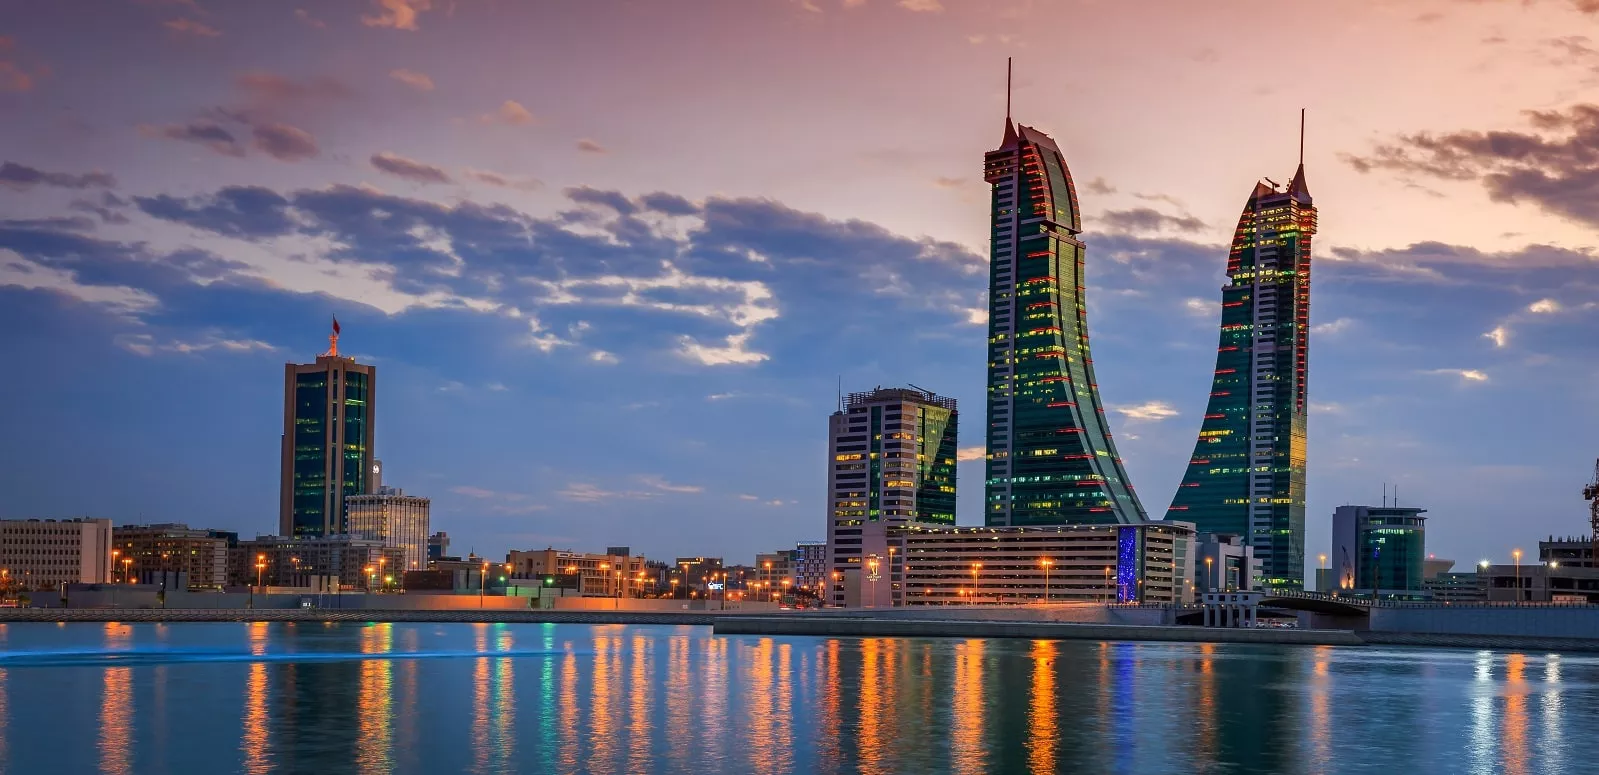 Bahrain Financial Harbour in Bahrain, Middle East | Architecture - Rated 3.6